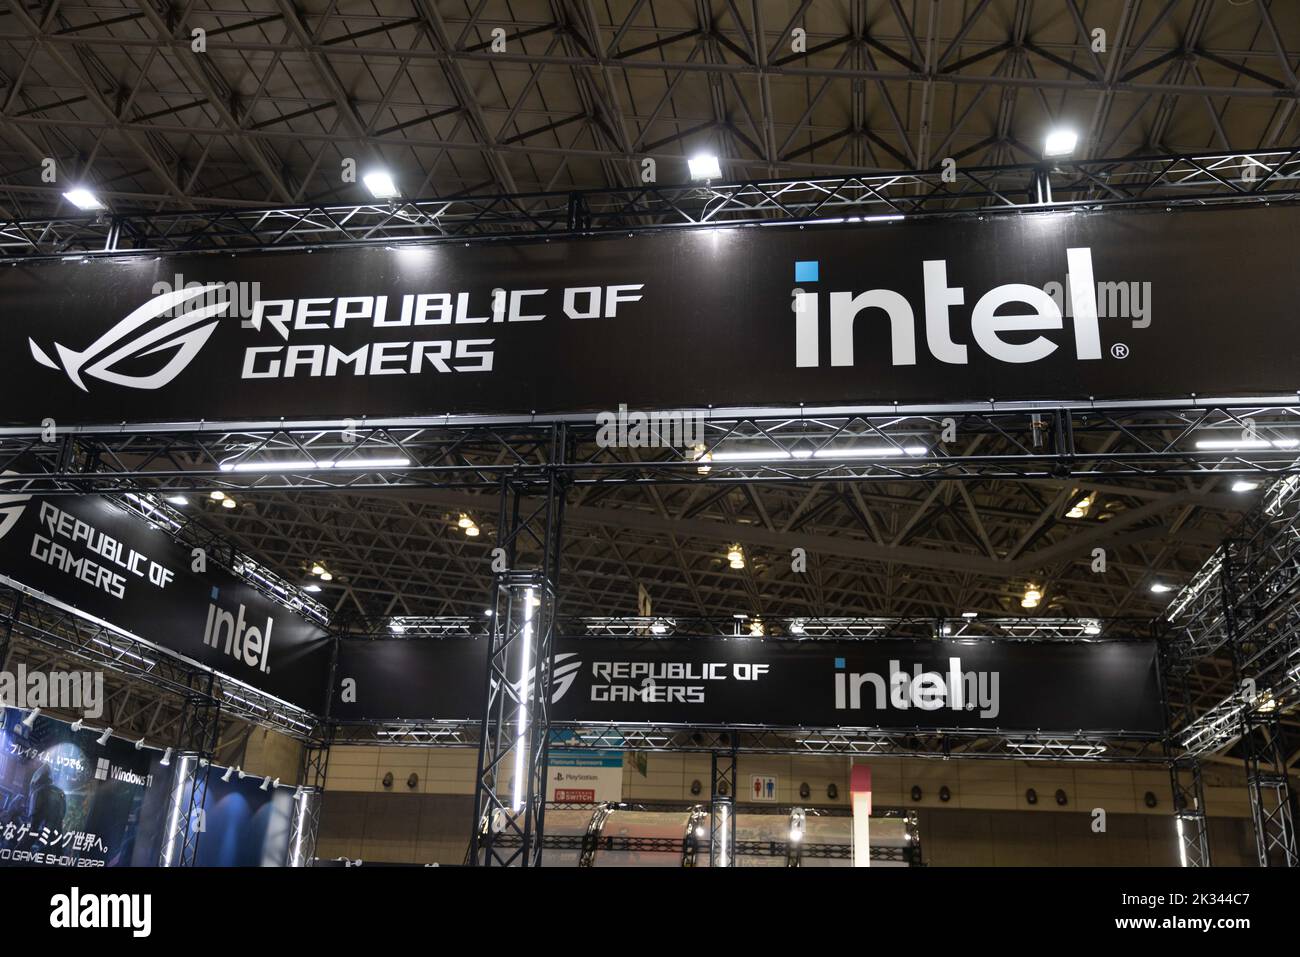 Intel (semiconductor manufacturing company) exhibition booth seen at Tokyo Game Show 2022. After a two years break forced by the Covid-19 pandemic, the Tokyo Game Show returned to Makuhari Messe in Chiba, Japan. Stock Photo